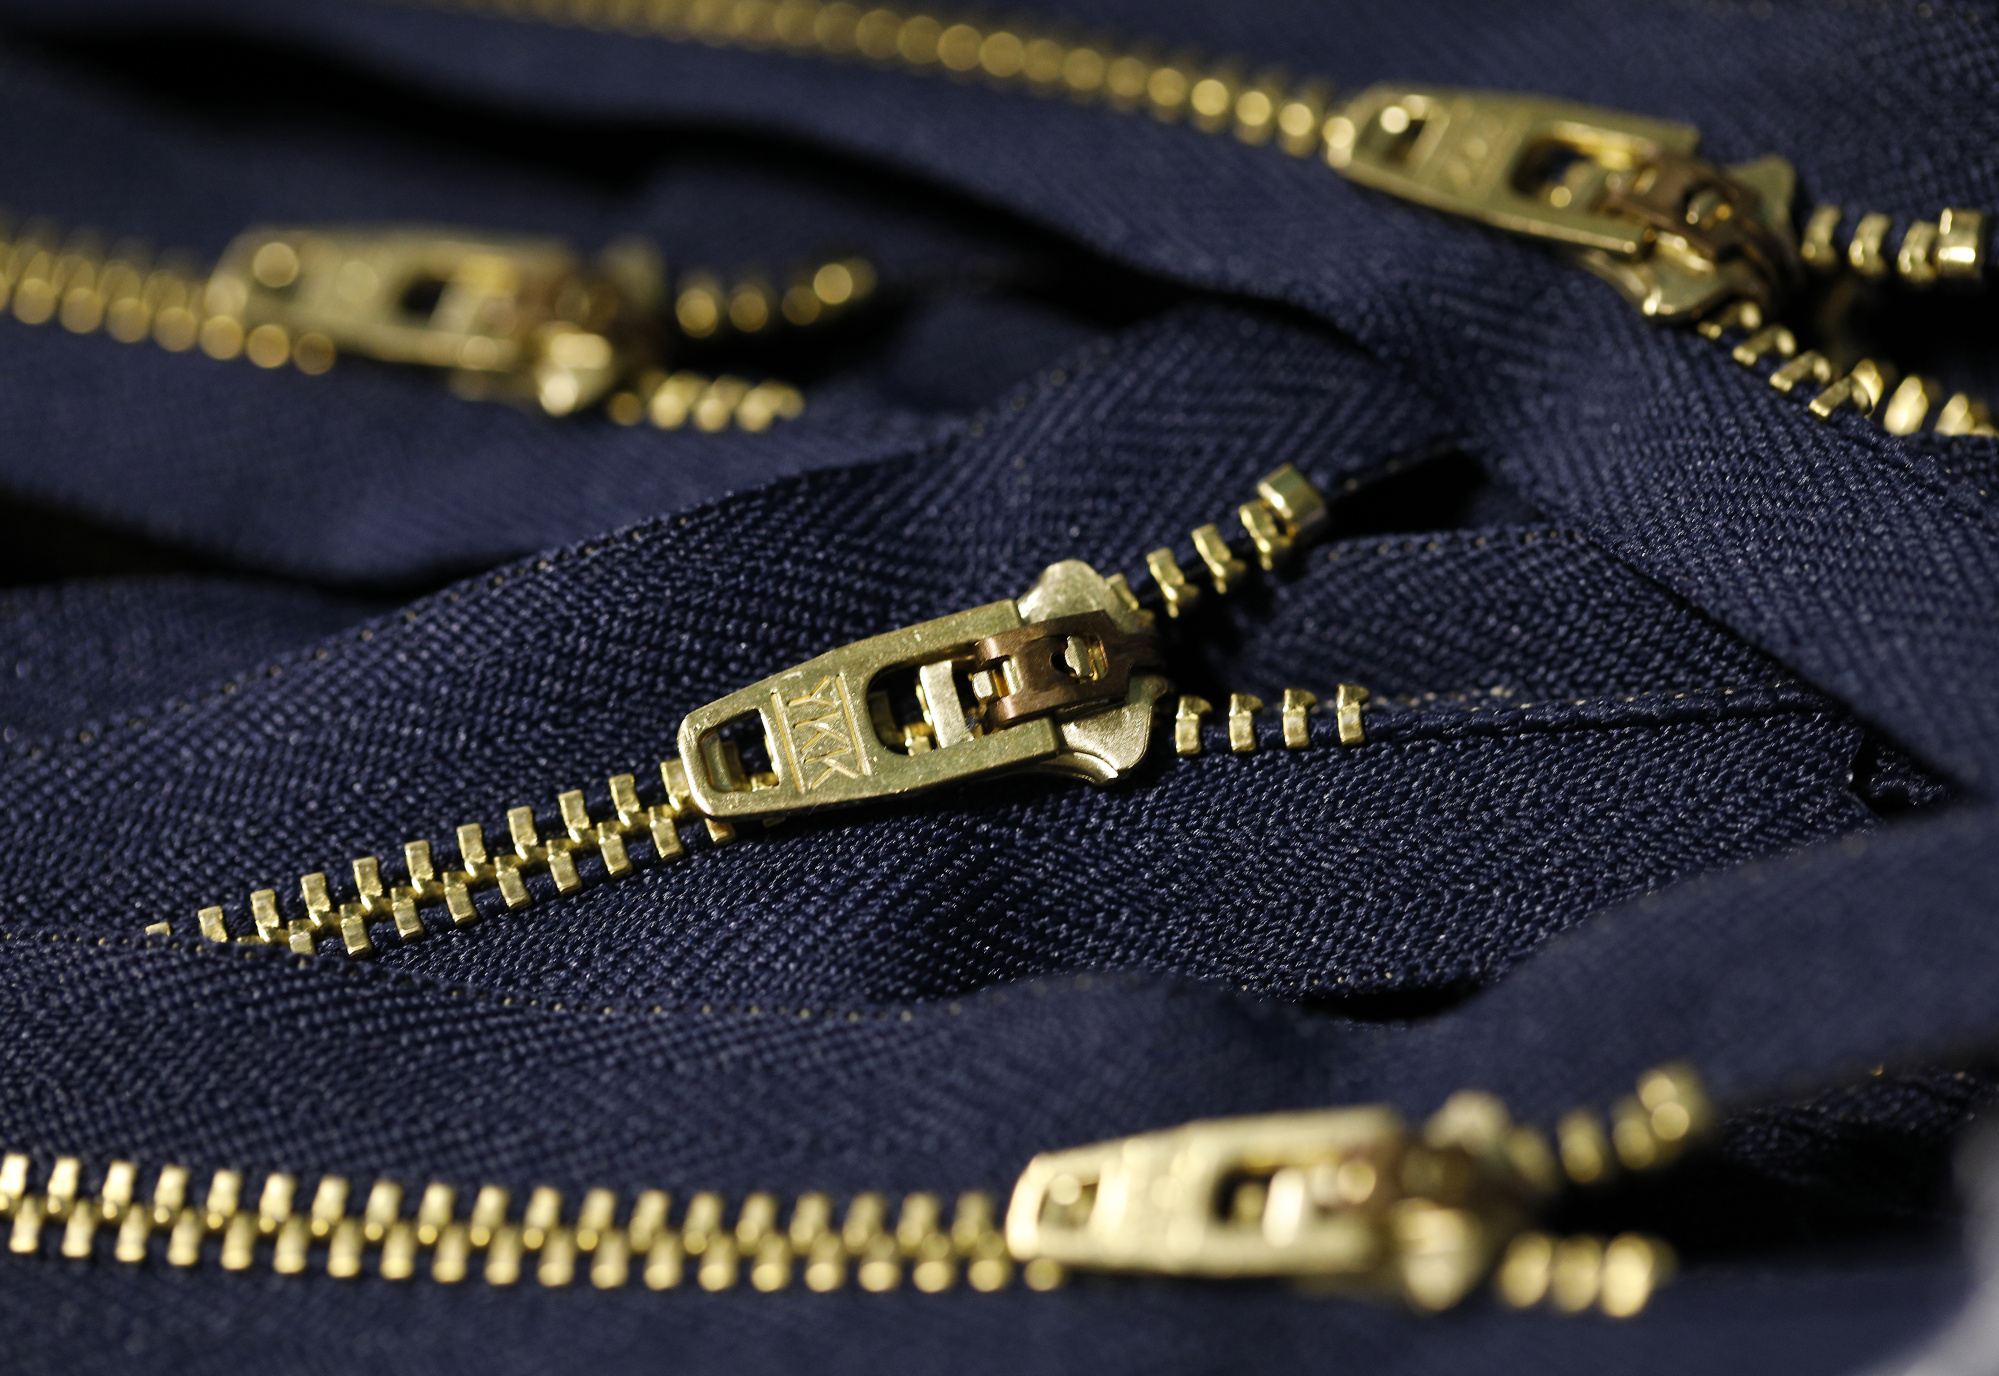 Why Zippers Have YKK On Them